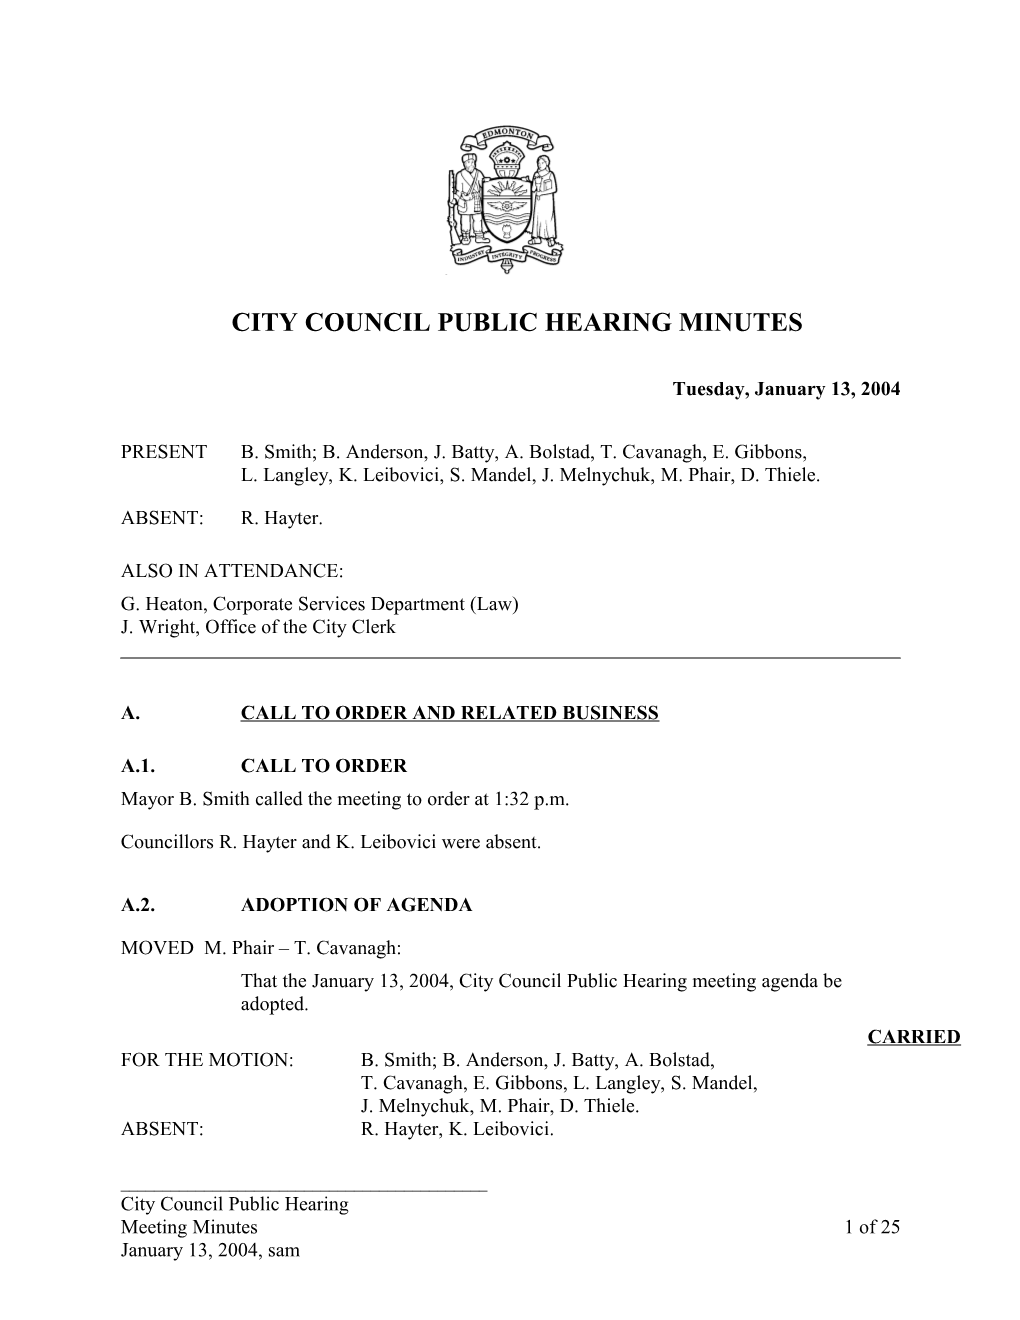 Minutes for City Council January 13, 2004 Meeting